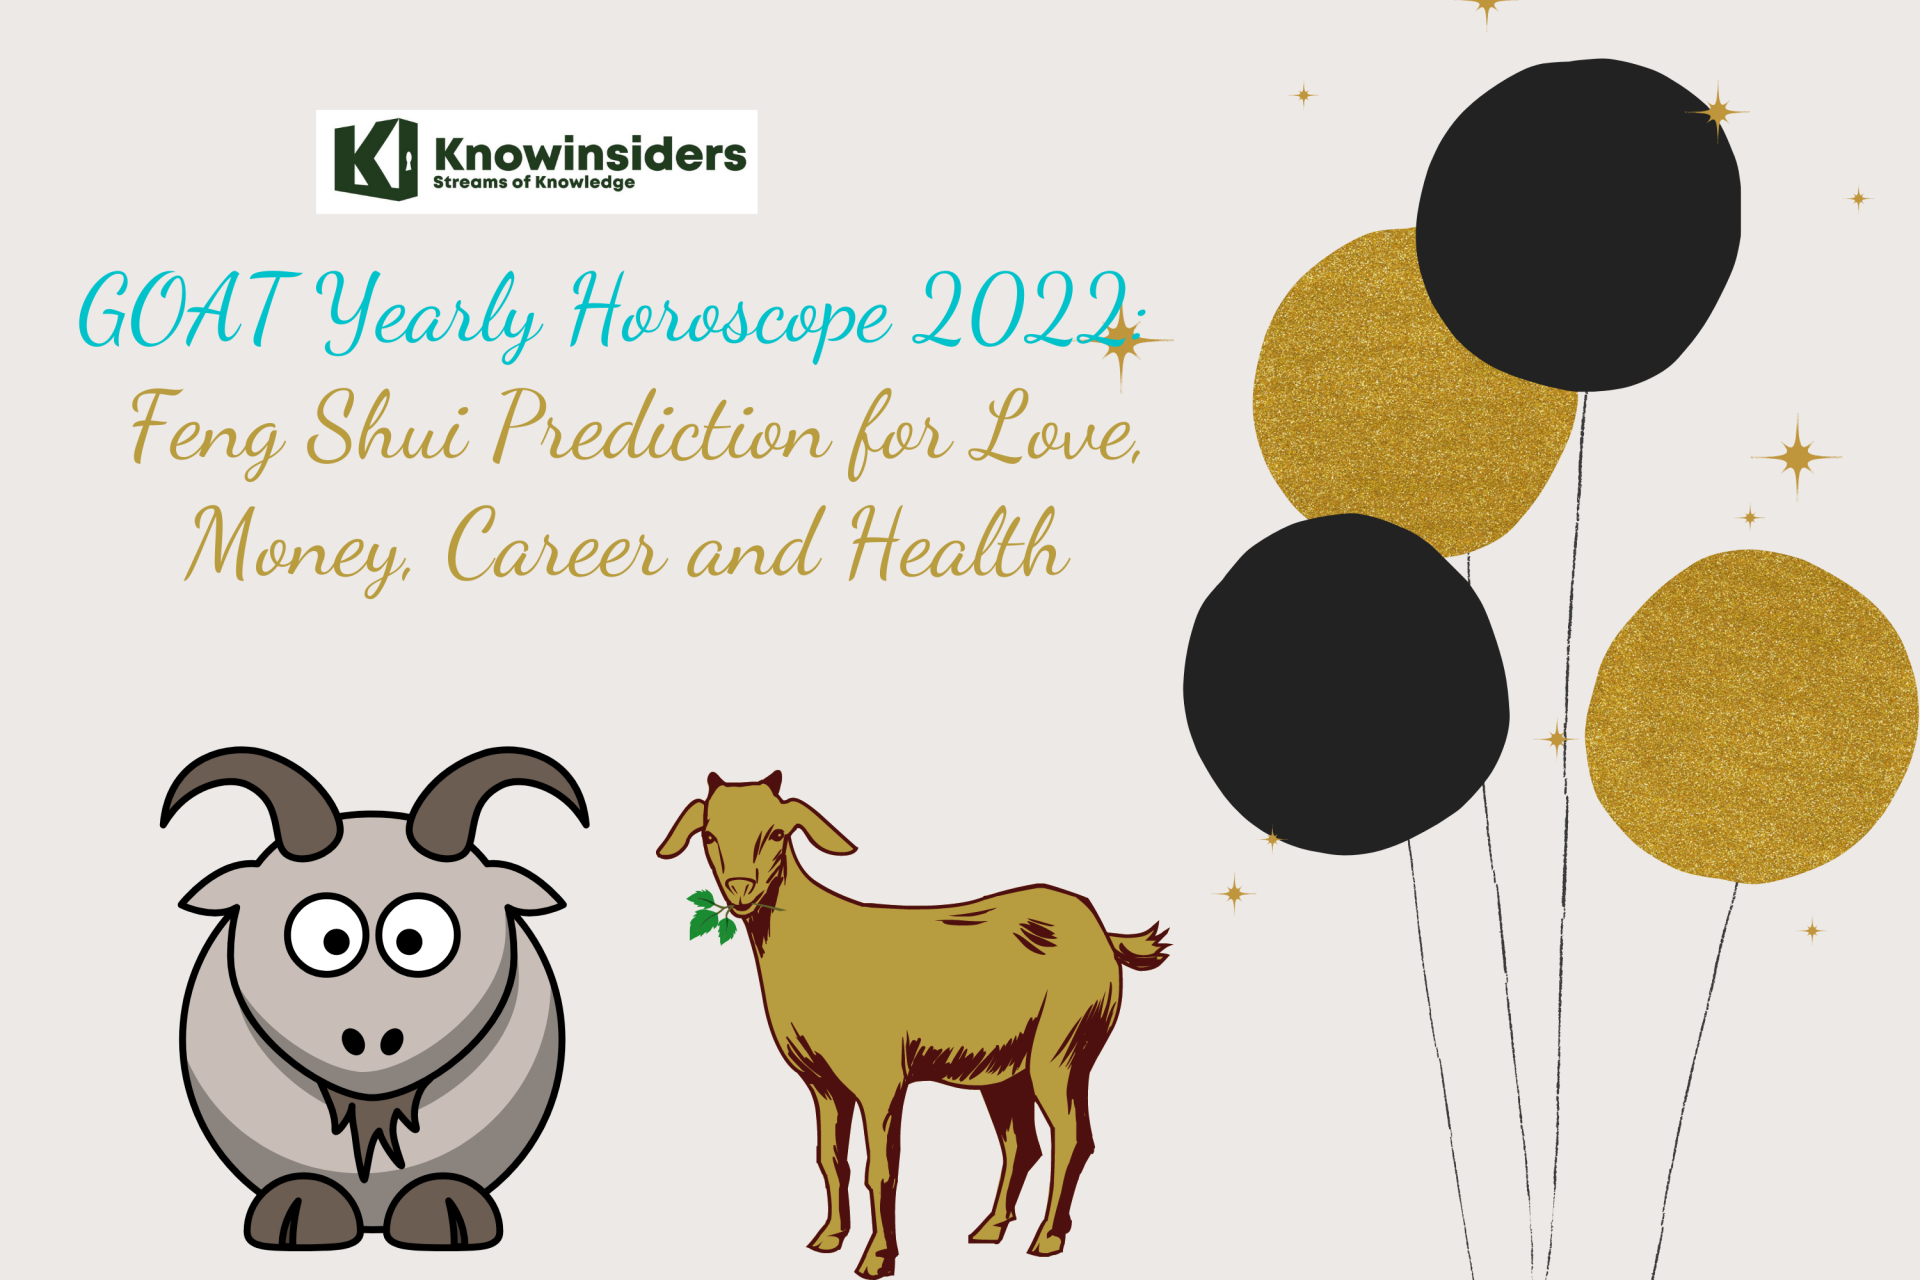 GOAT Yearly Horoscope 2022 – Feng Shui Prediction for Love, Money, Career and Health